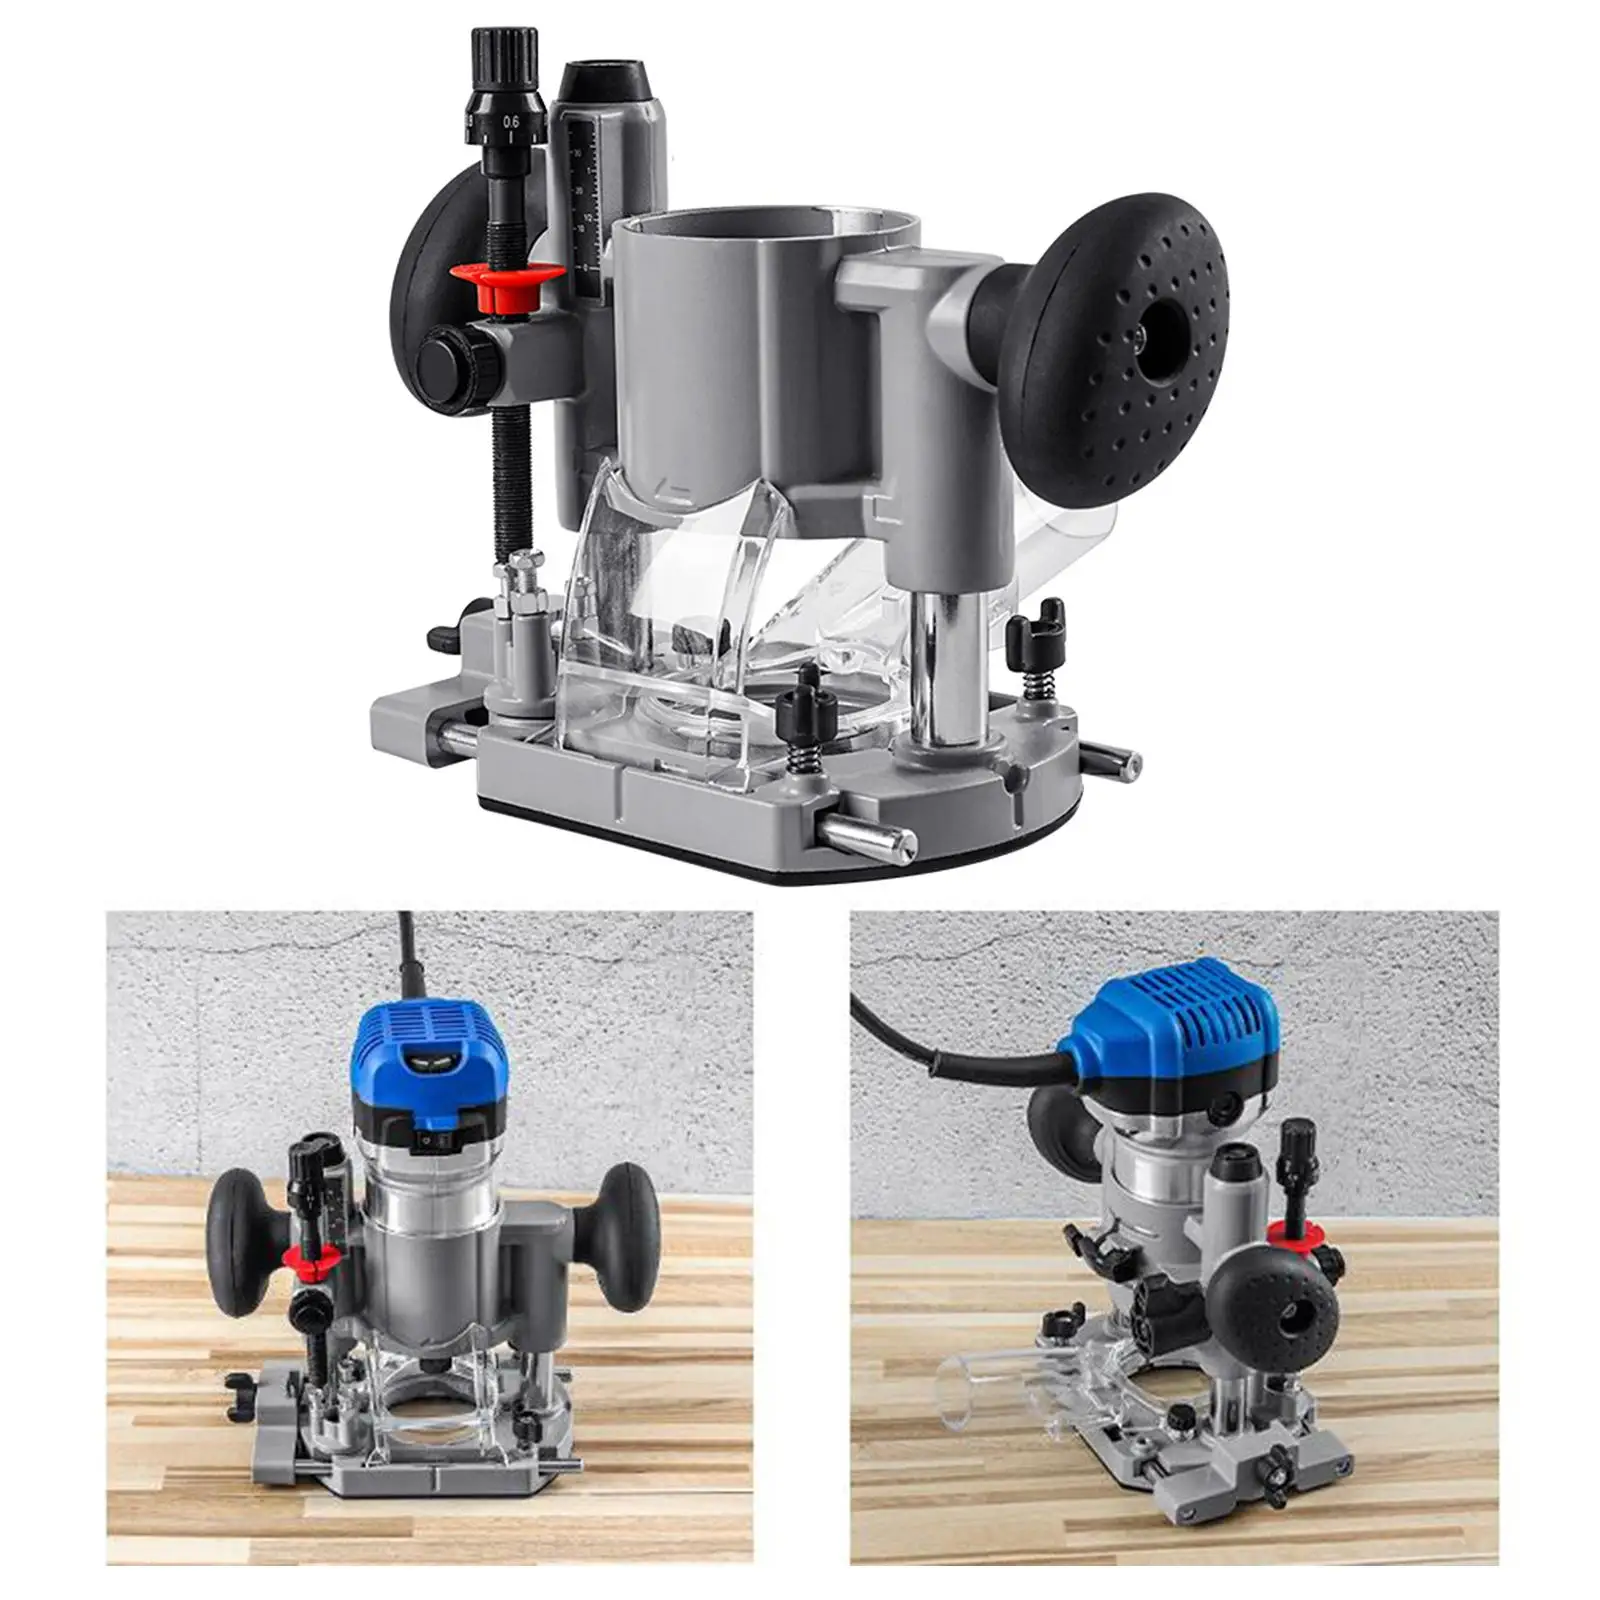 Electric Trimming Machine Accessories Trimming Machine Base Plunge Router Base for Edge Trimming